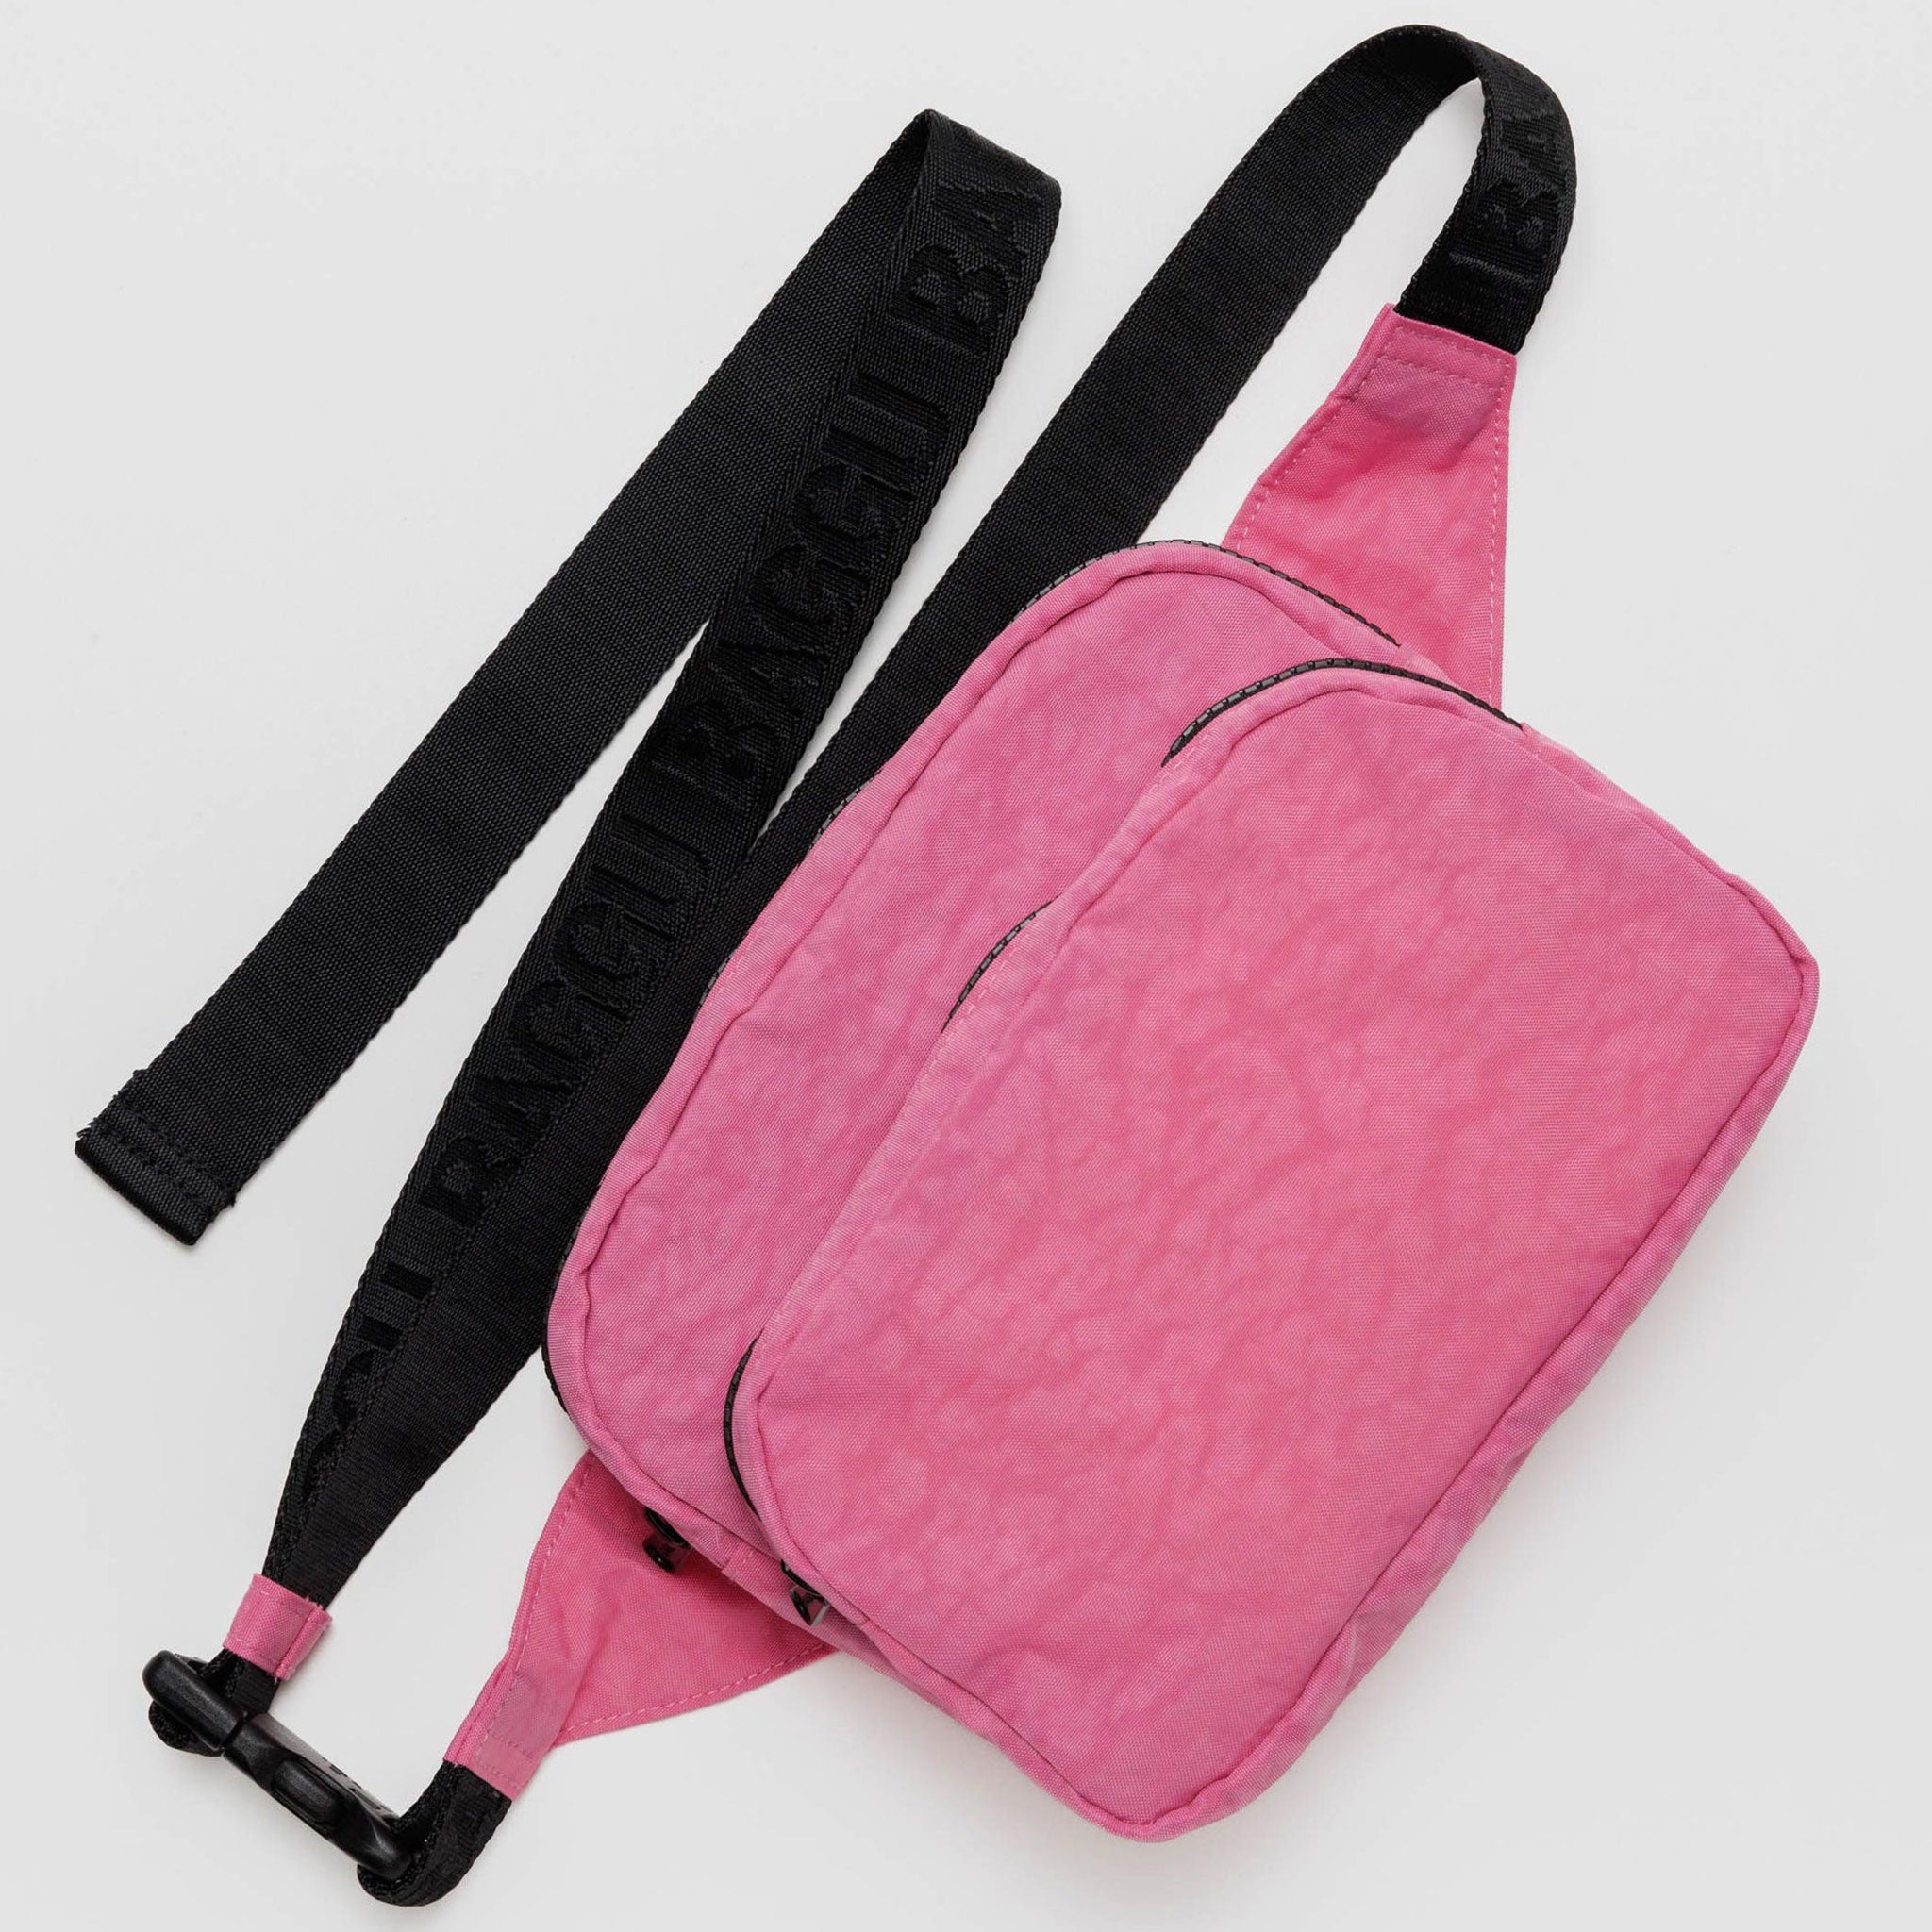 a bright pink fanny pack with black strap